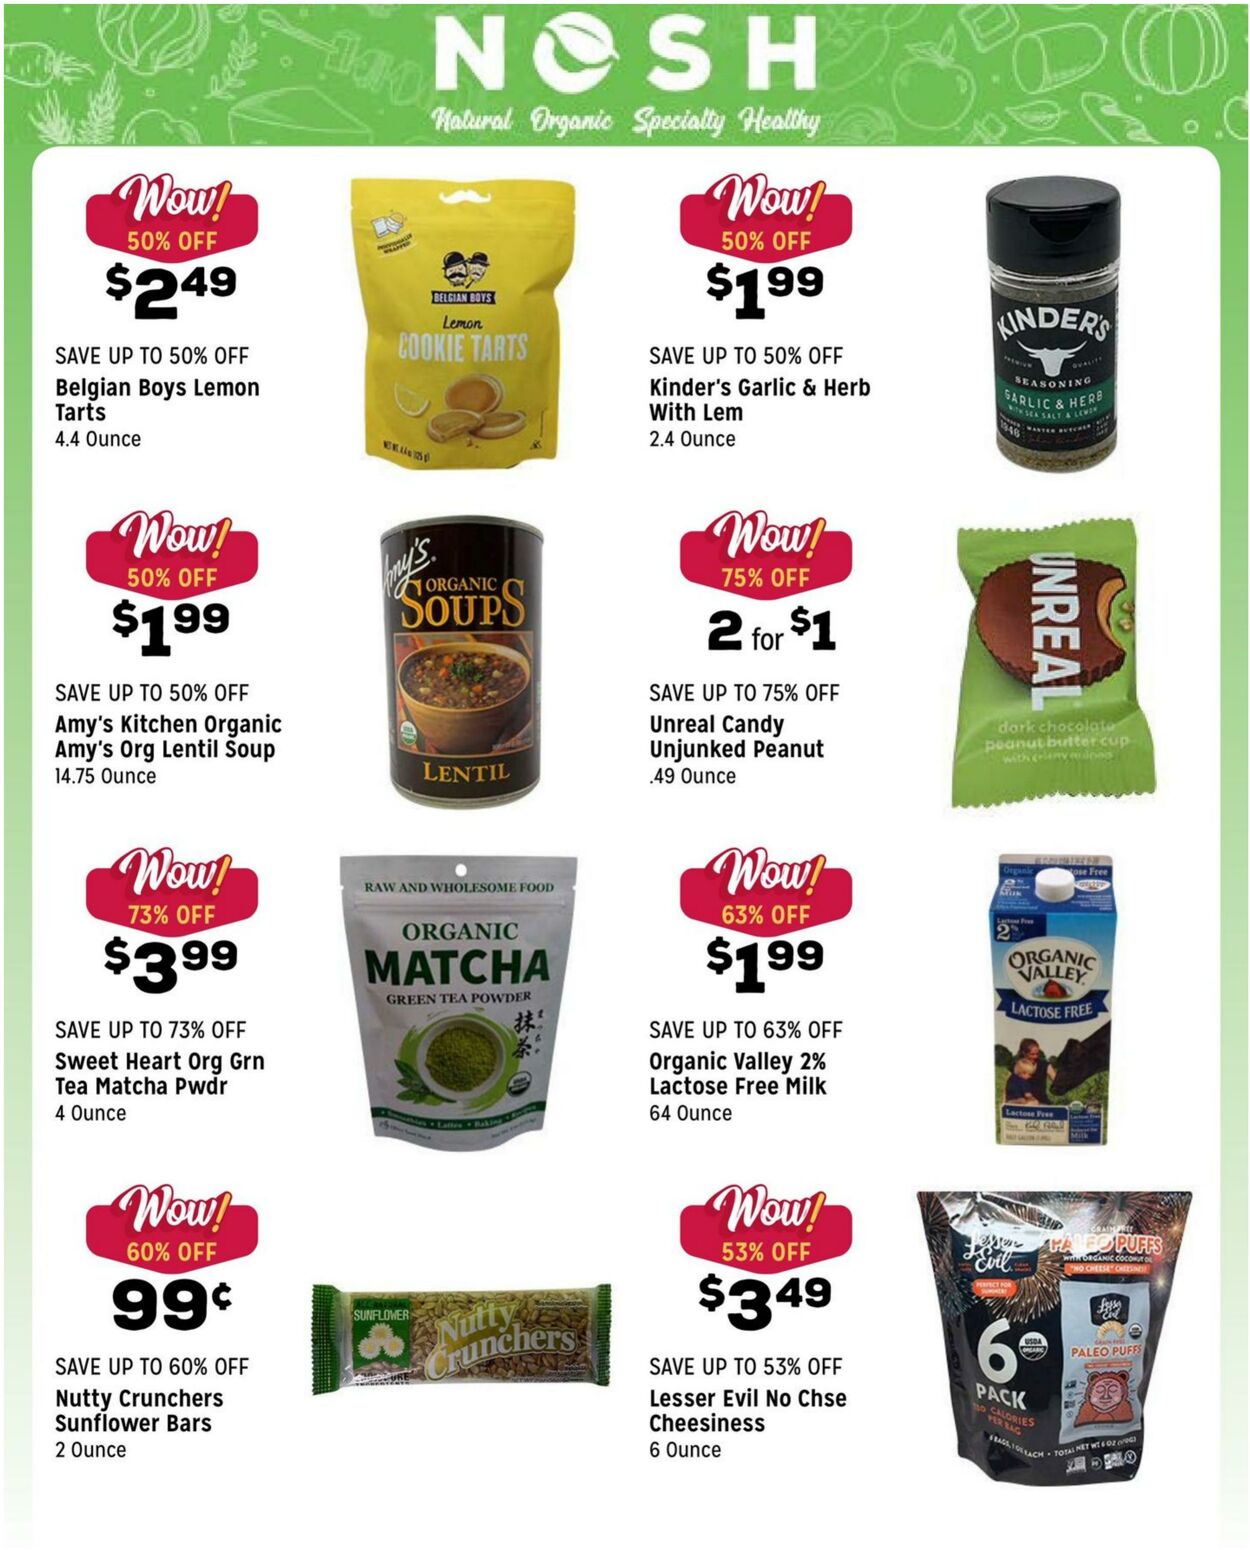 Weekly ad Grocery Outlet 08/31/2022 - 09/06/2022